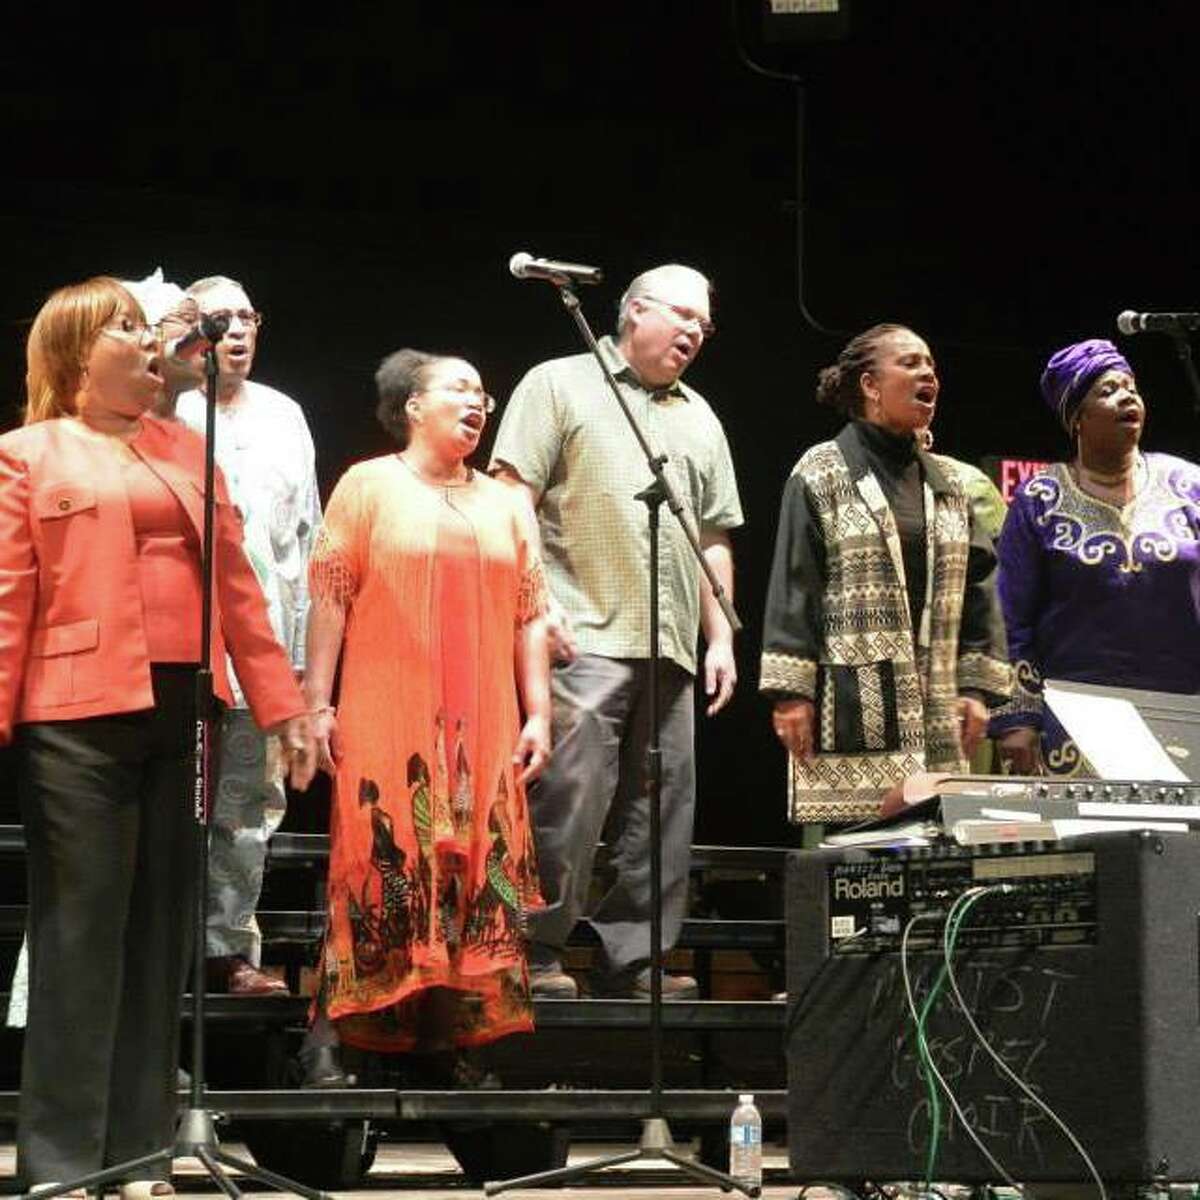 Spirit of Unity gospel music troupe, pictured in concert, will perform in celebration of Black History Month at Keeler Tavern Museum and History Center on Sunday, Feb. 24, at 4 p.m.